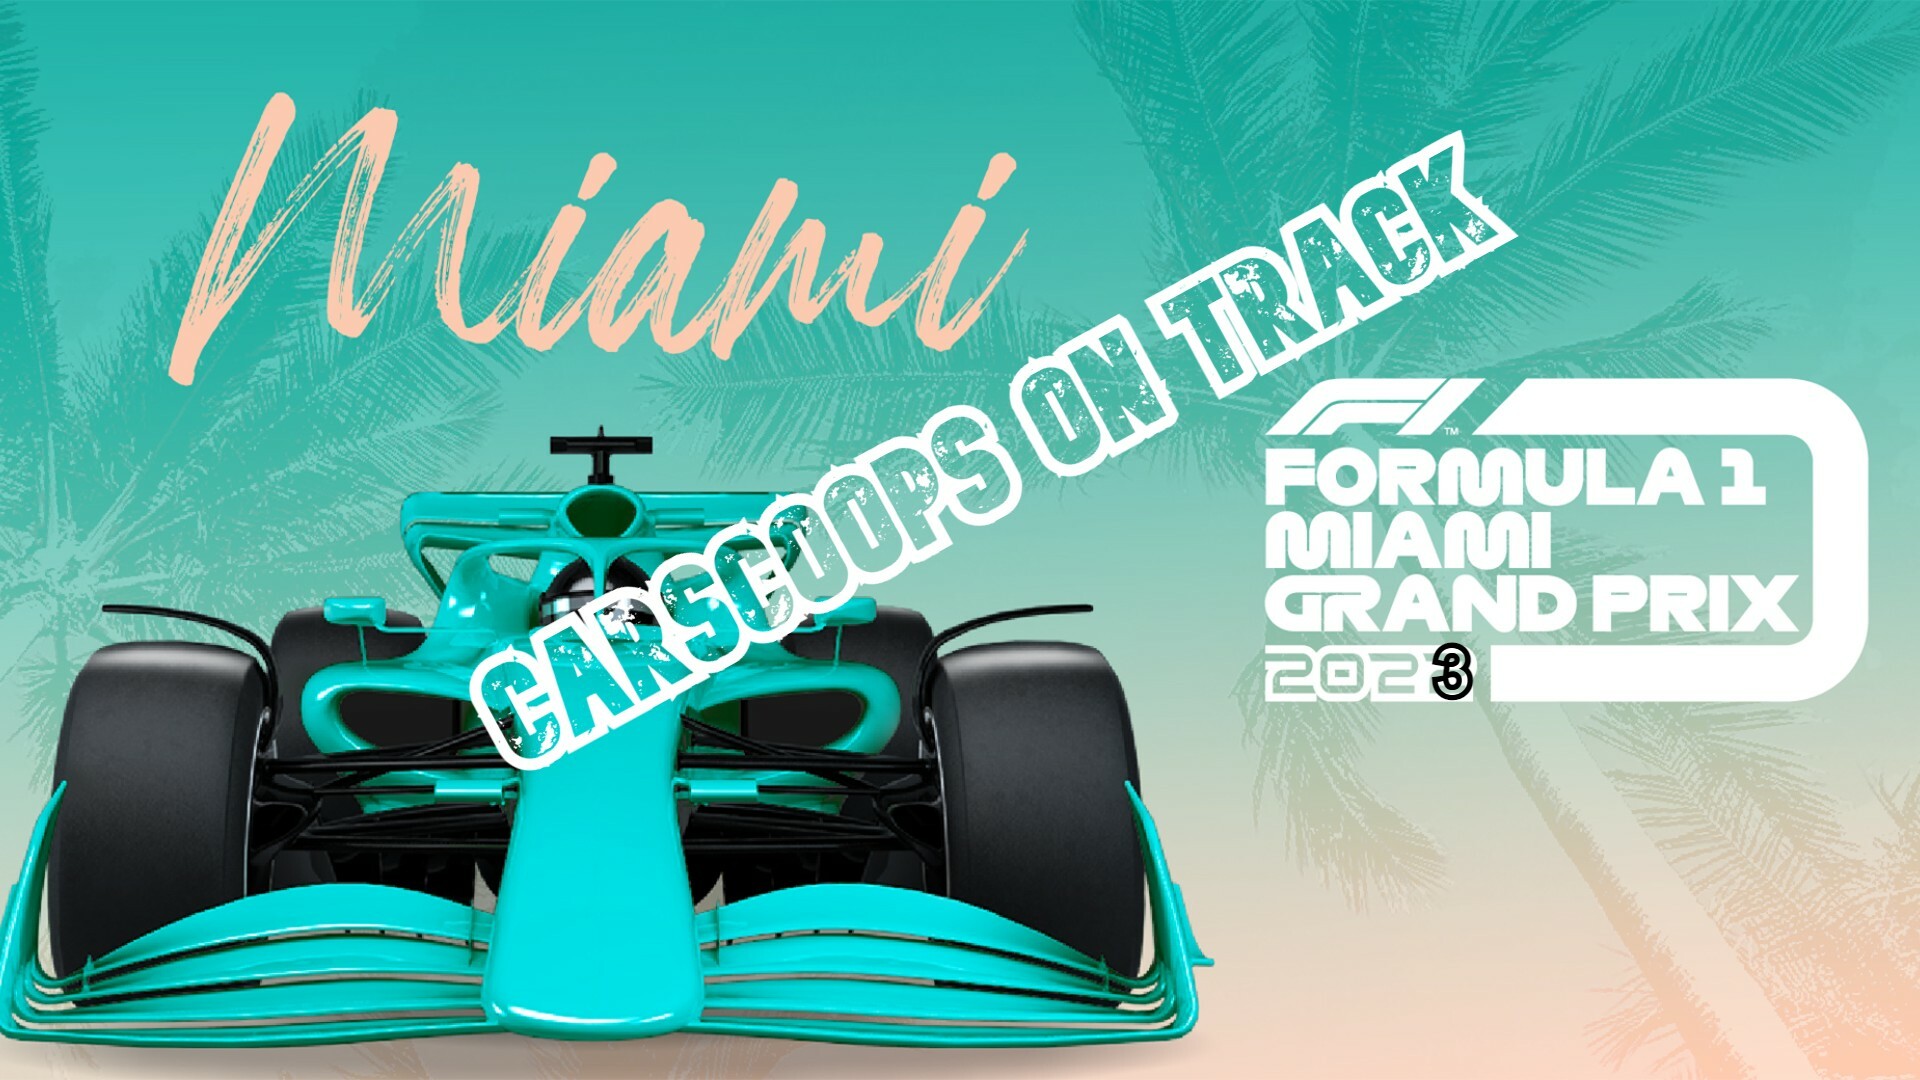 We're Going To The Miami Grand Prix, Anything You'd Like Us To Check Out?